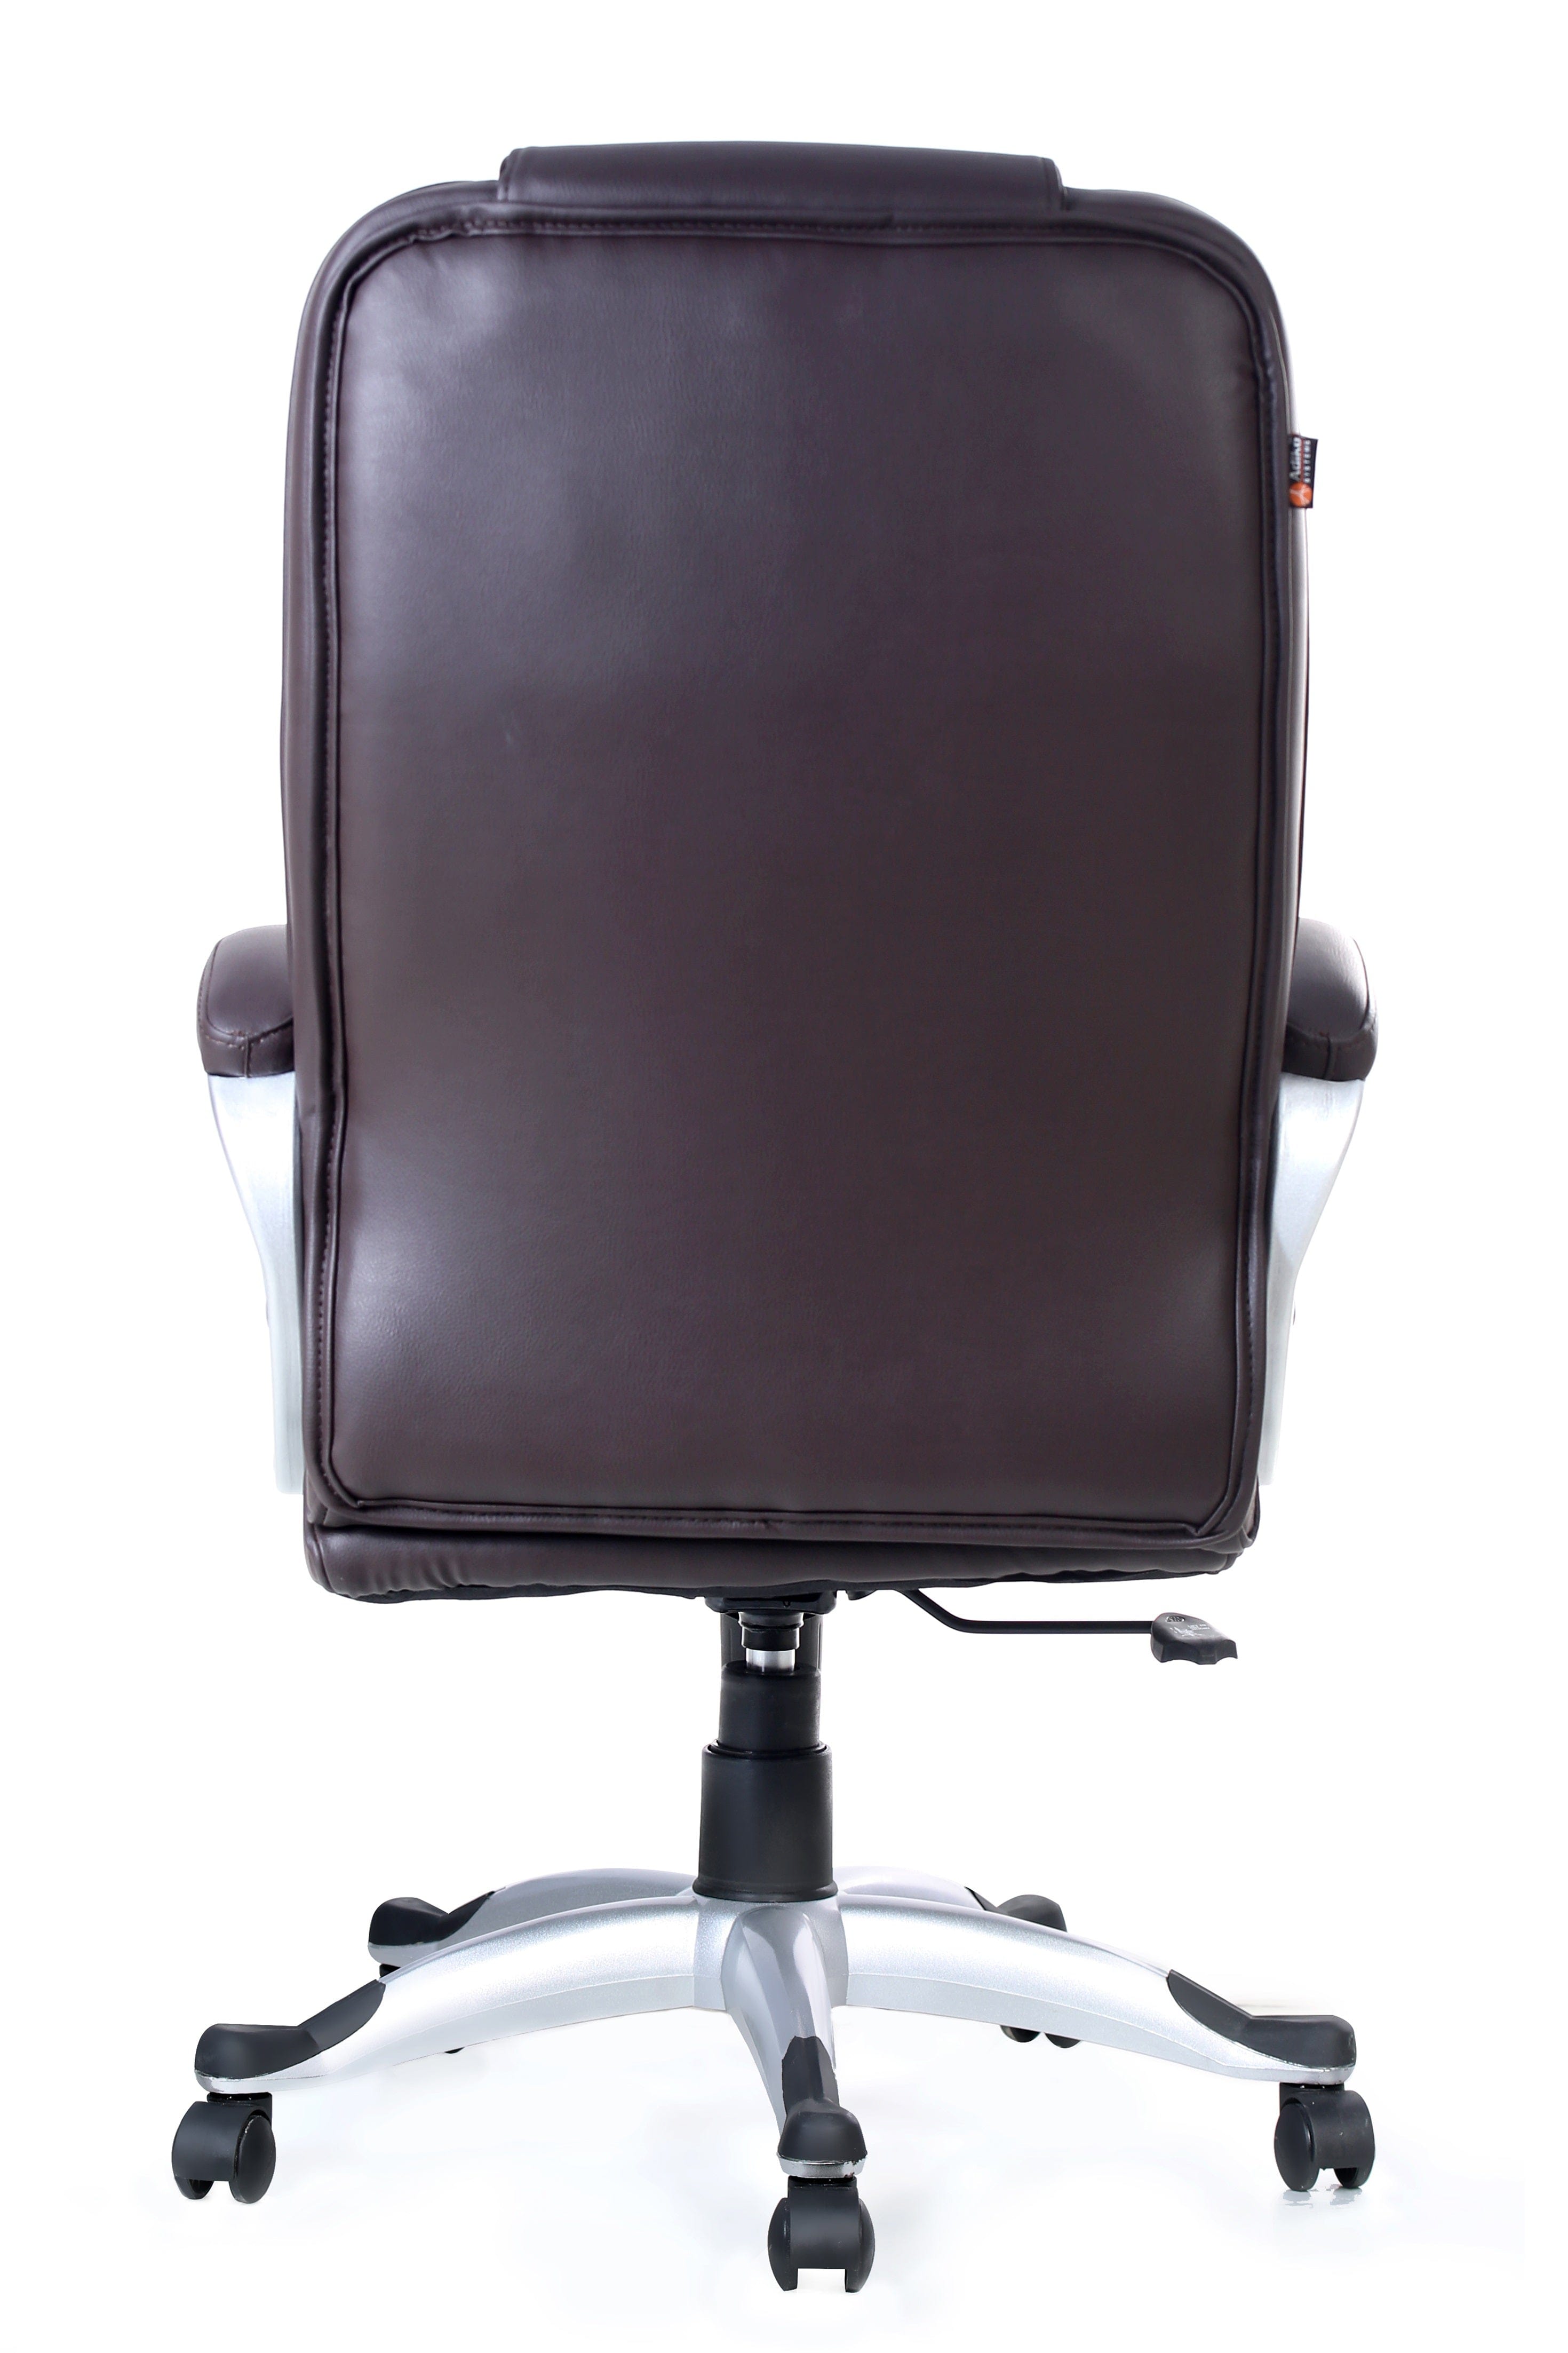 Smart Executive Chair in Brown Colour by Adiko Systems